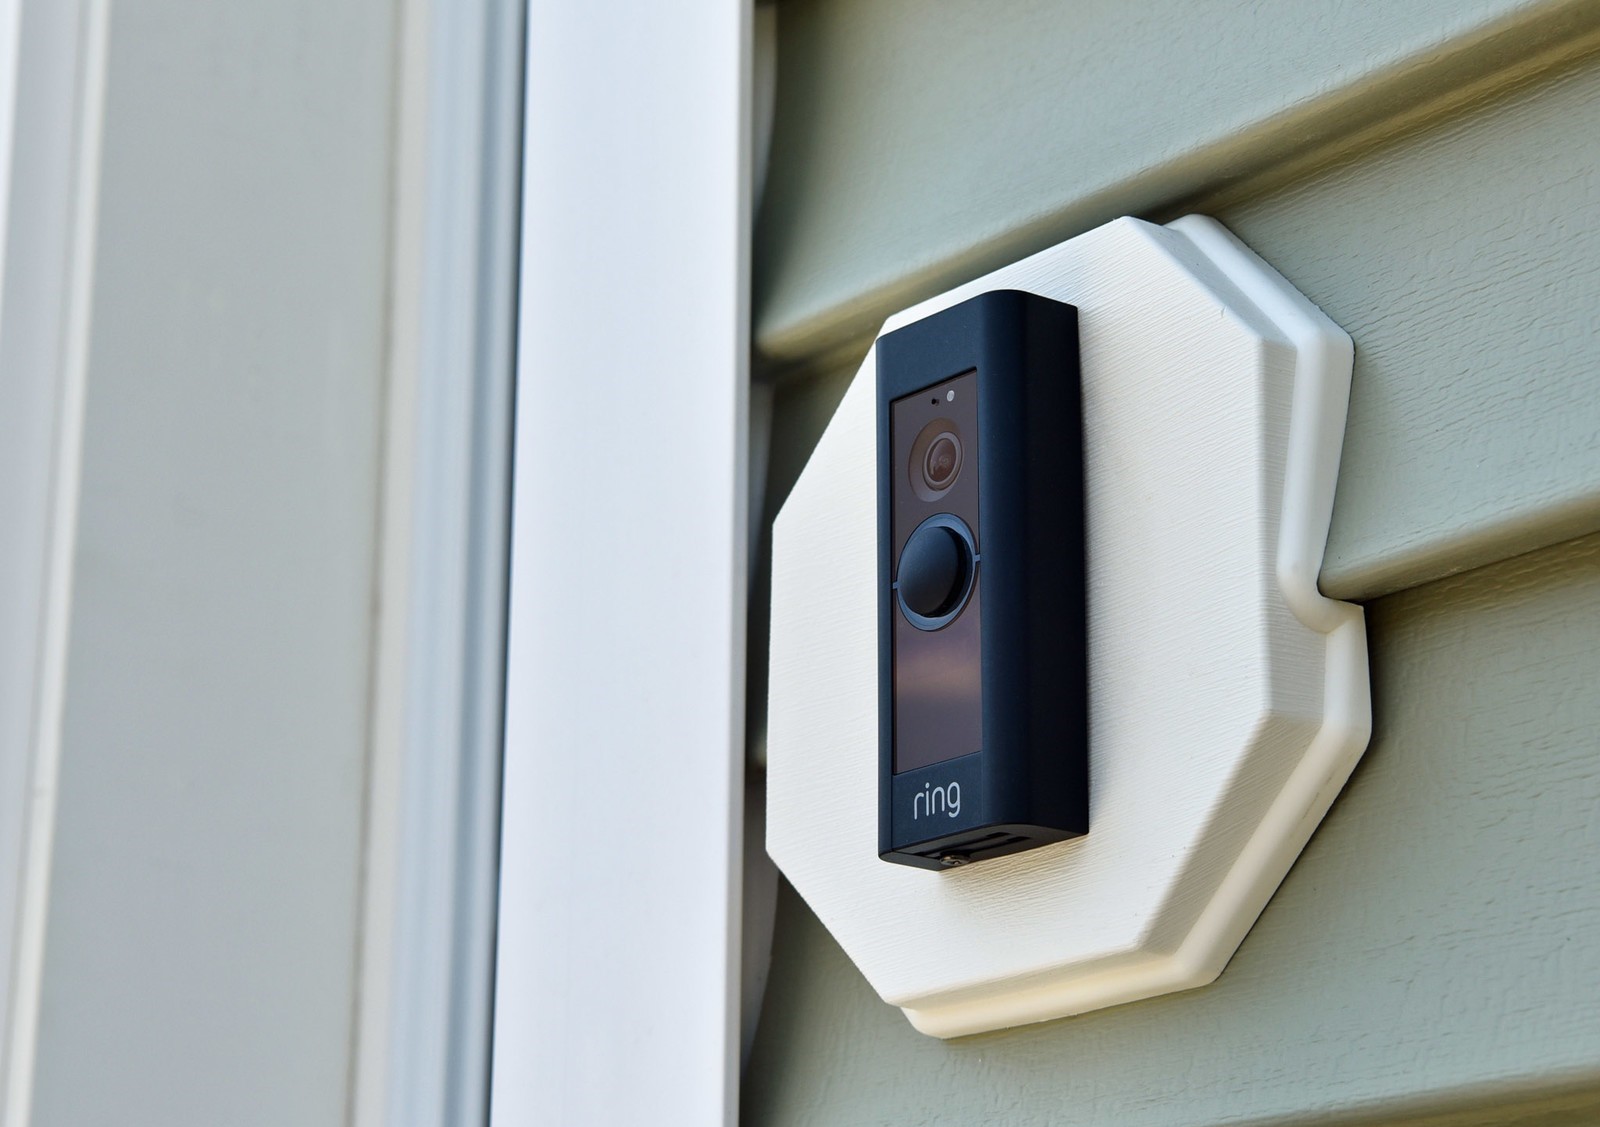 How To Install Ring Doorbell On Siding